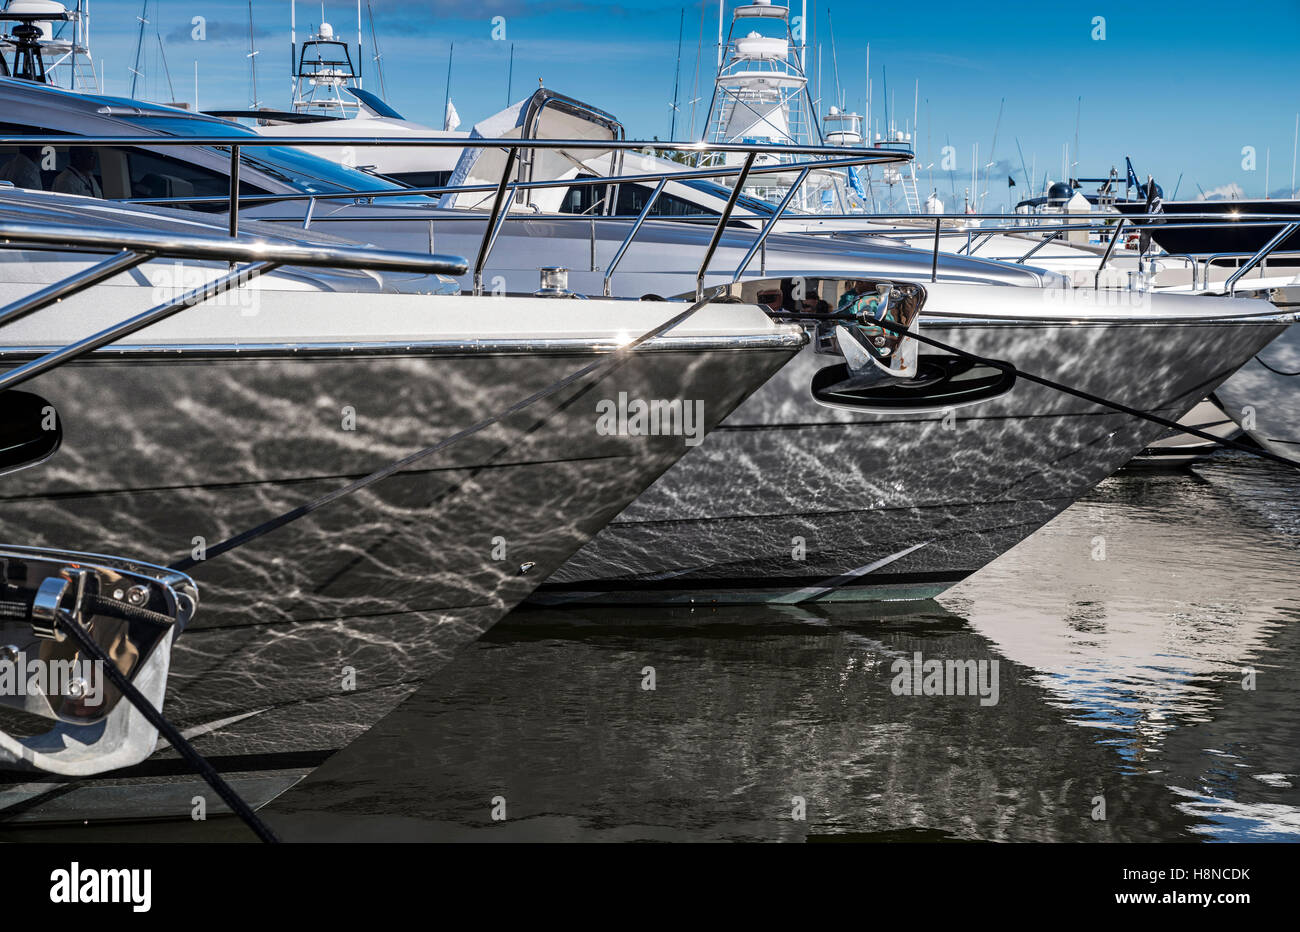 Luxury motor boats at berth in Ft Lauderdale Florida Stock Photo